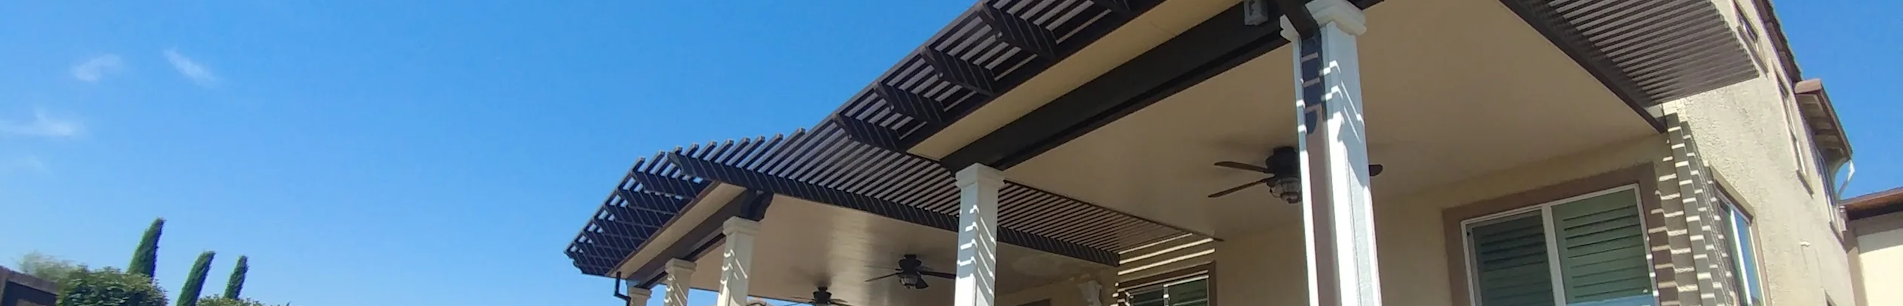 Solid Aluminum Patio Covers Gallery - Gallery of Patio Cover Design & Installation West Sacramento Citrus Heights CA